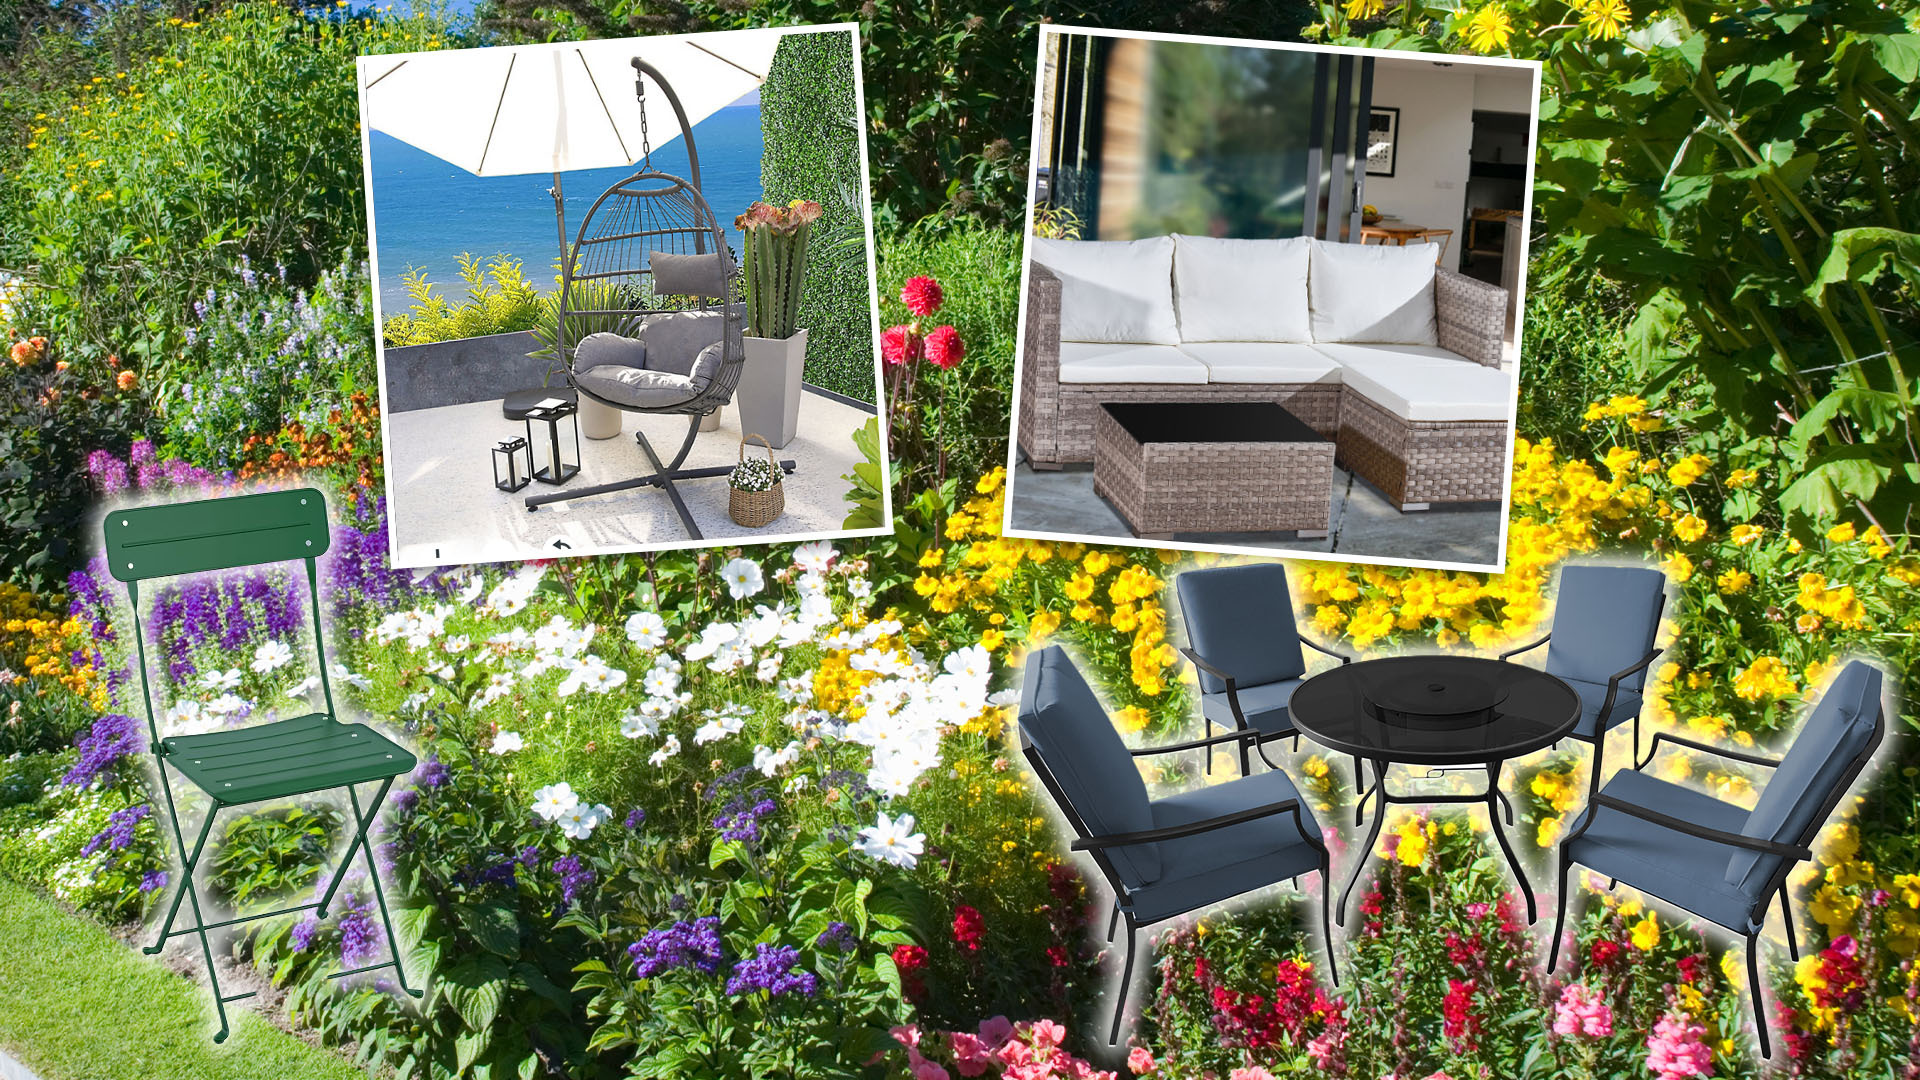 Cheapest shops to buy garden furniture this weekend – including The Range and B&Q [Video]